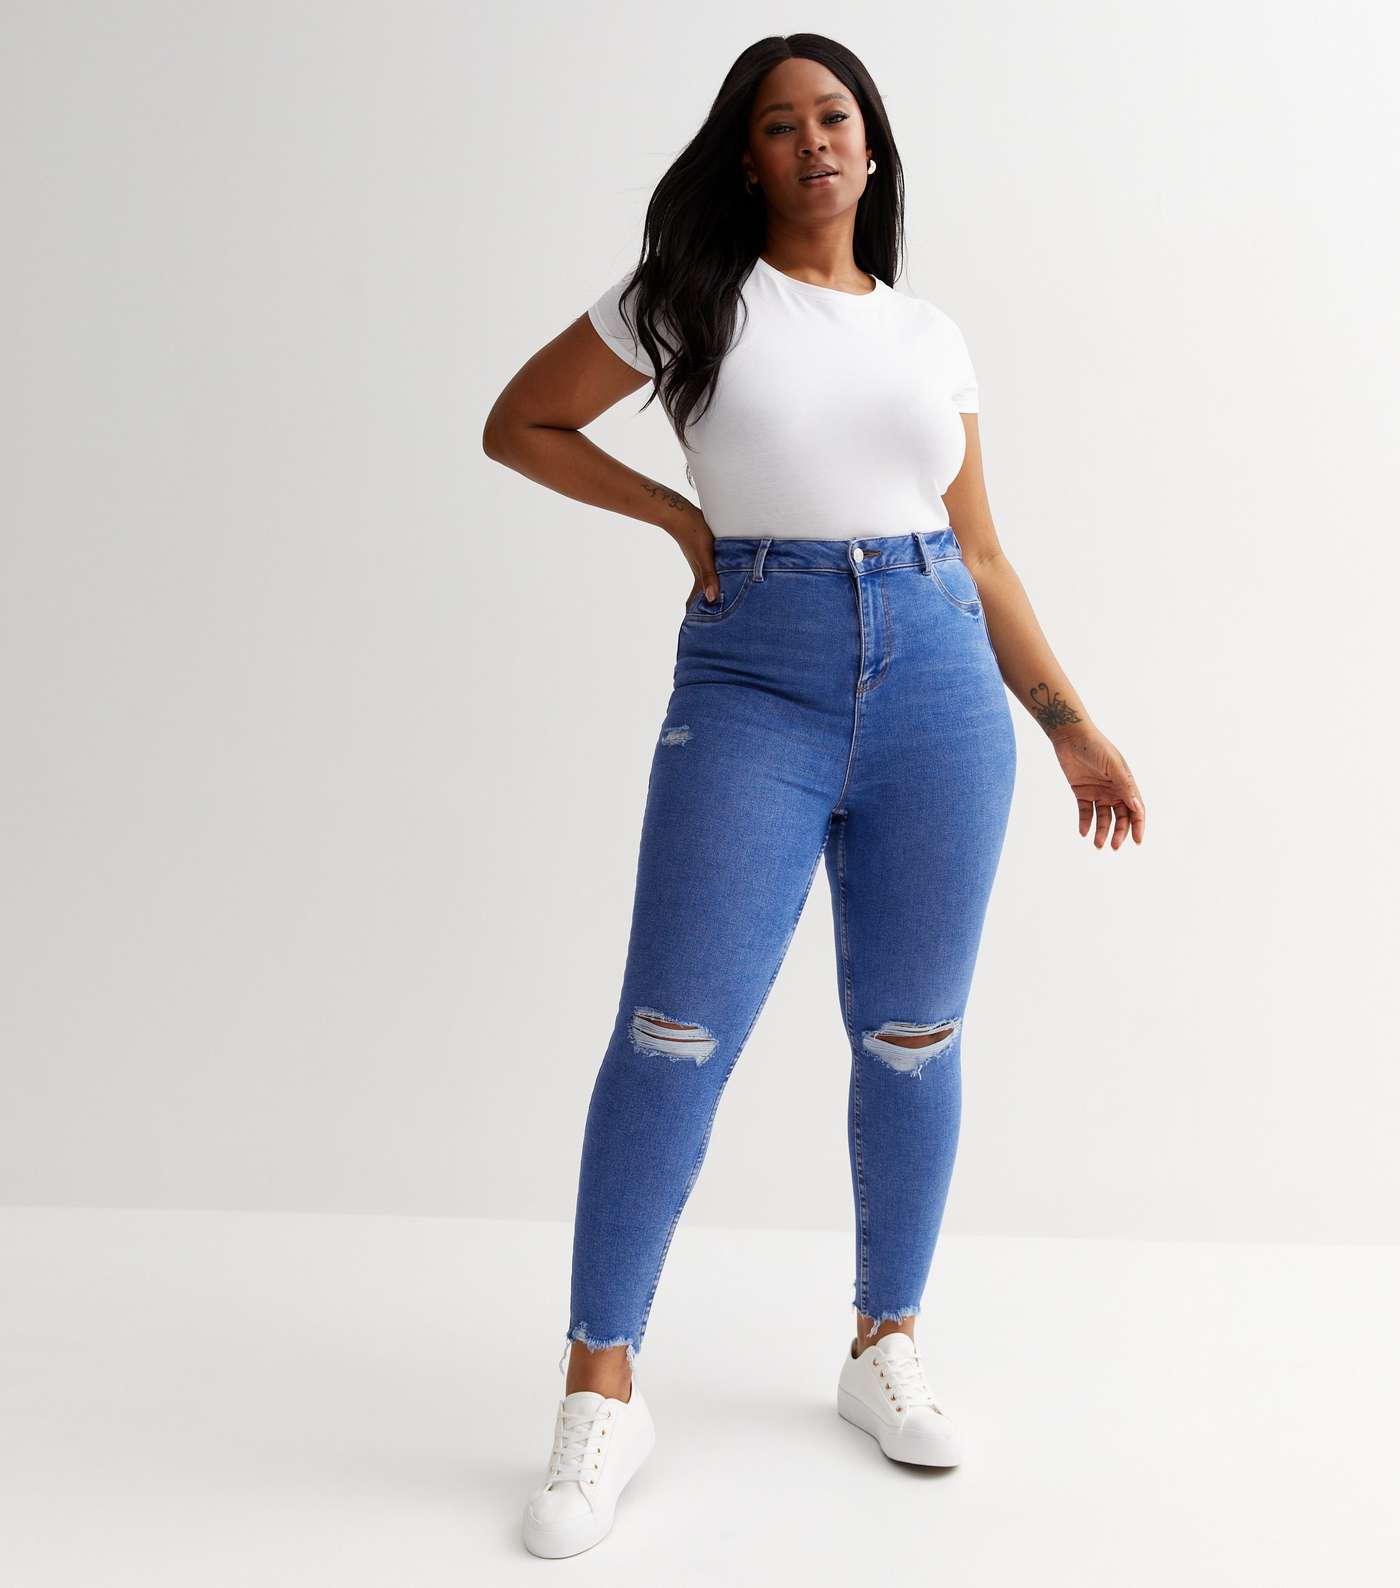 Curves Bright Blue Ripped High Waist Hallie Super Skinny Jeans Image 2